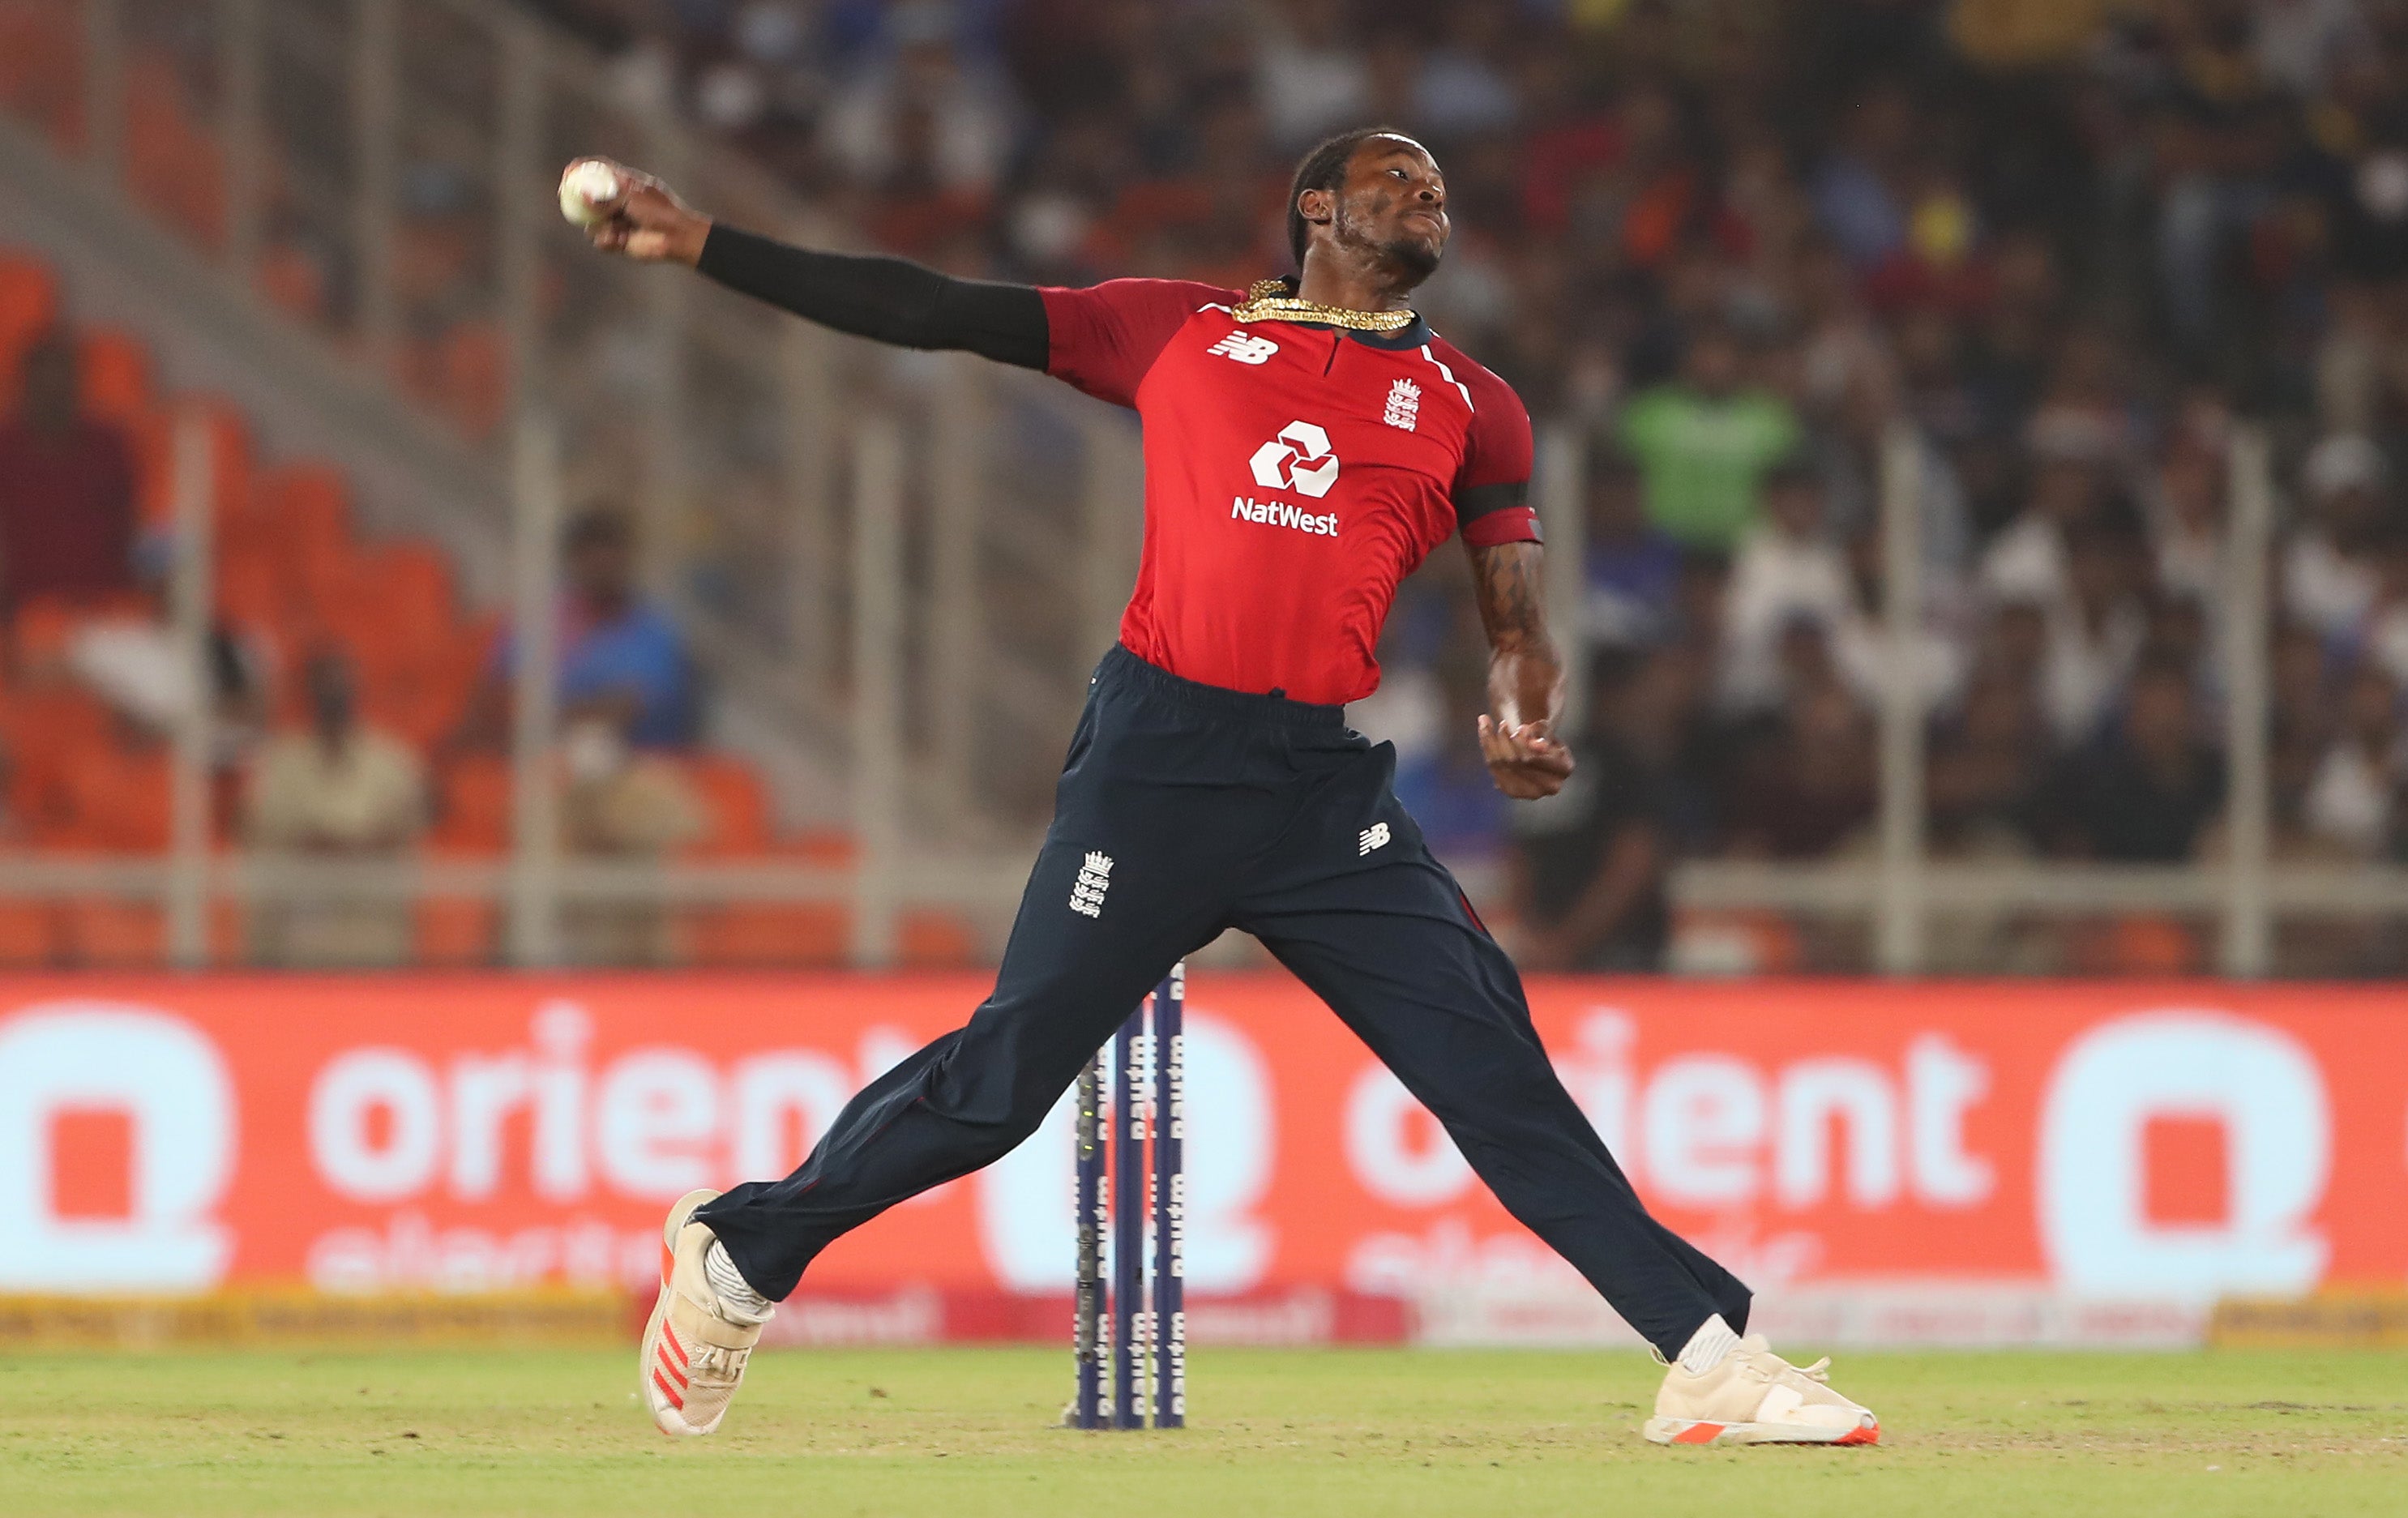 Jofra Archer was selected in England’s T20 World Cup squad